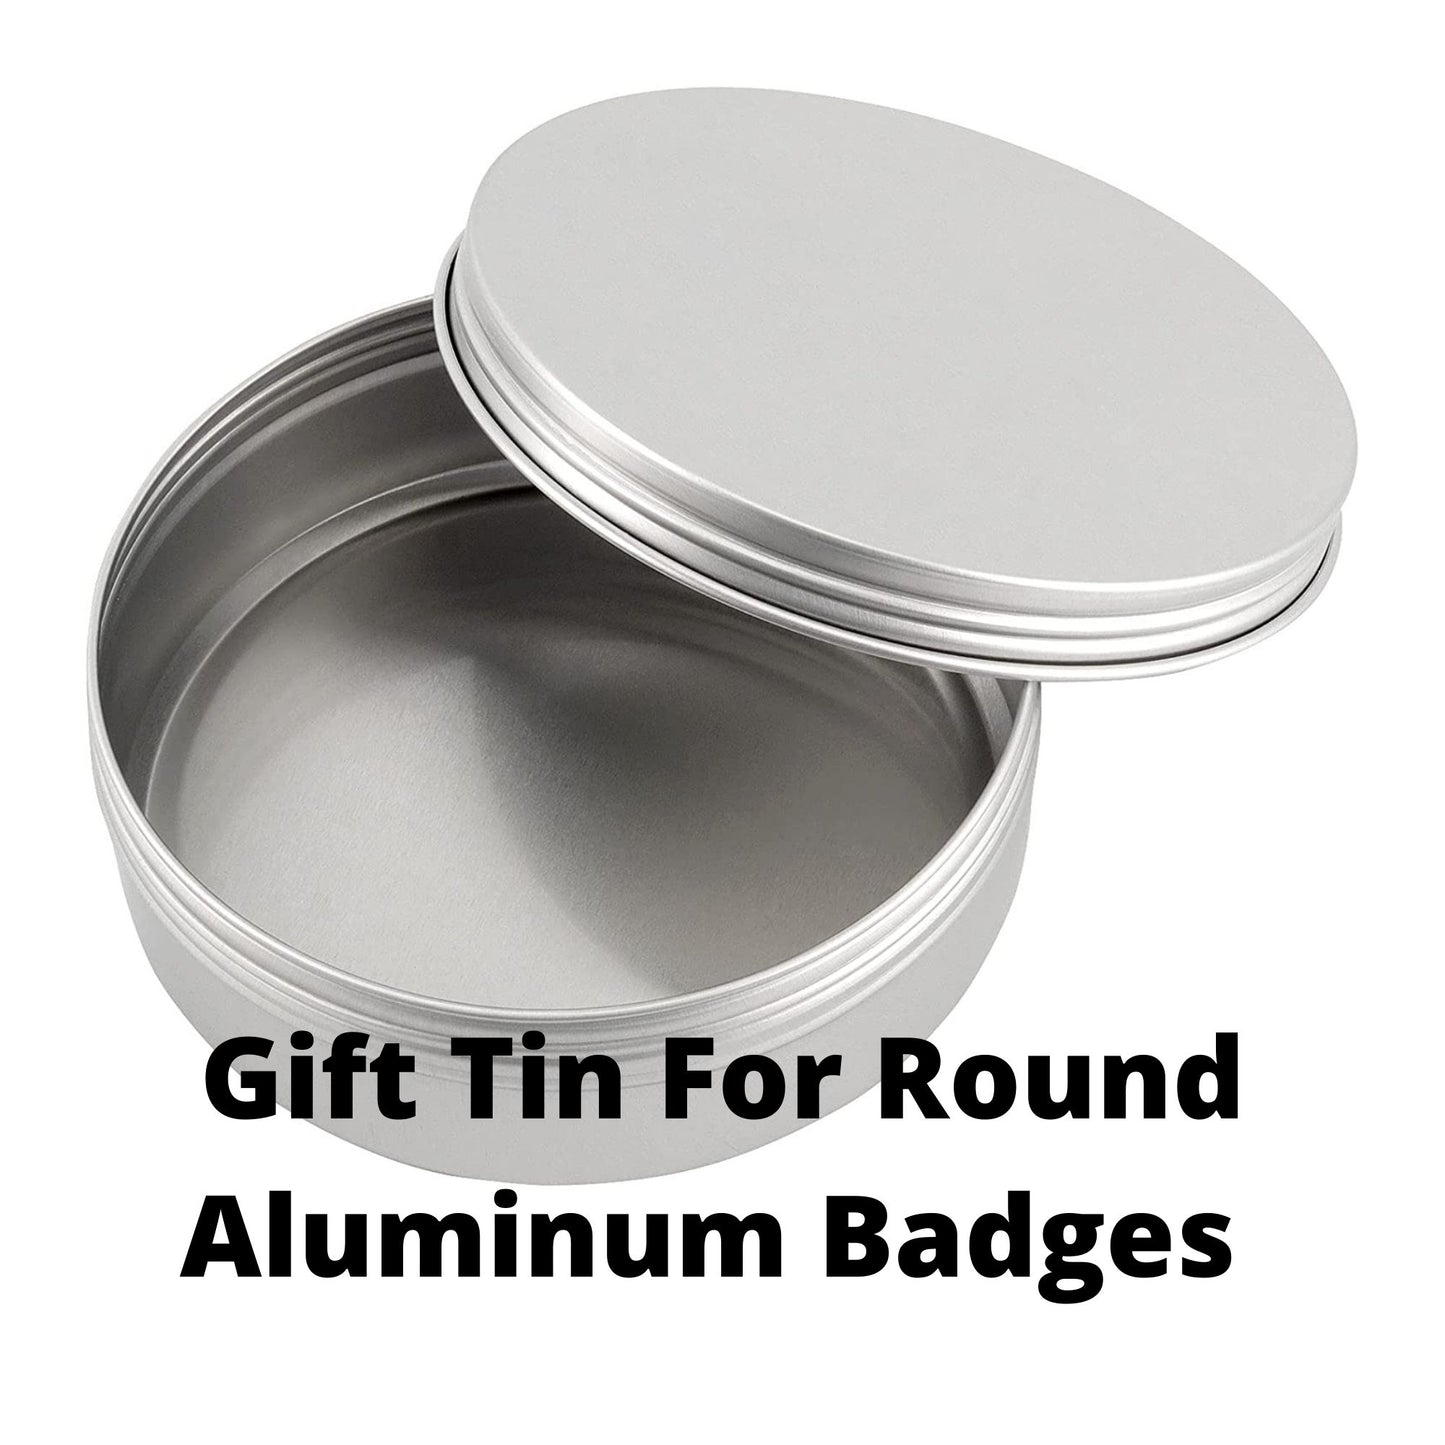 Gift Tin For Round Aluminum Badge Kits (Closeout Read Notes)